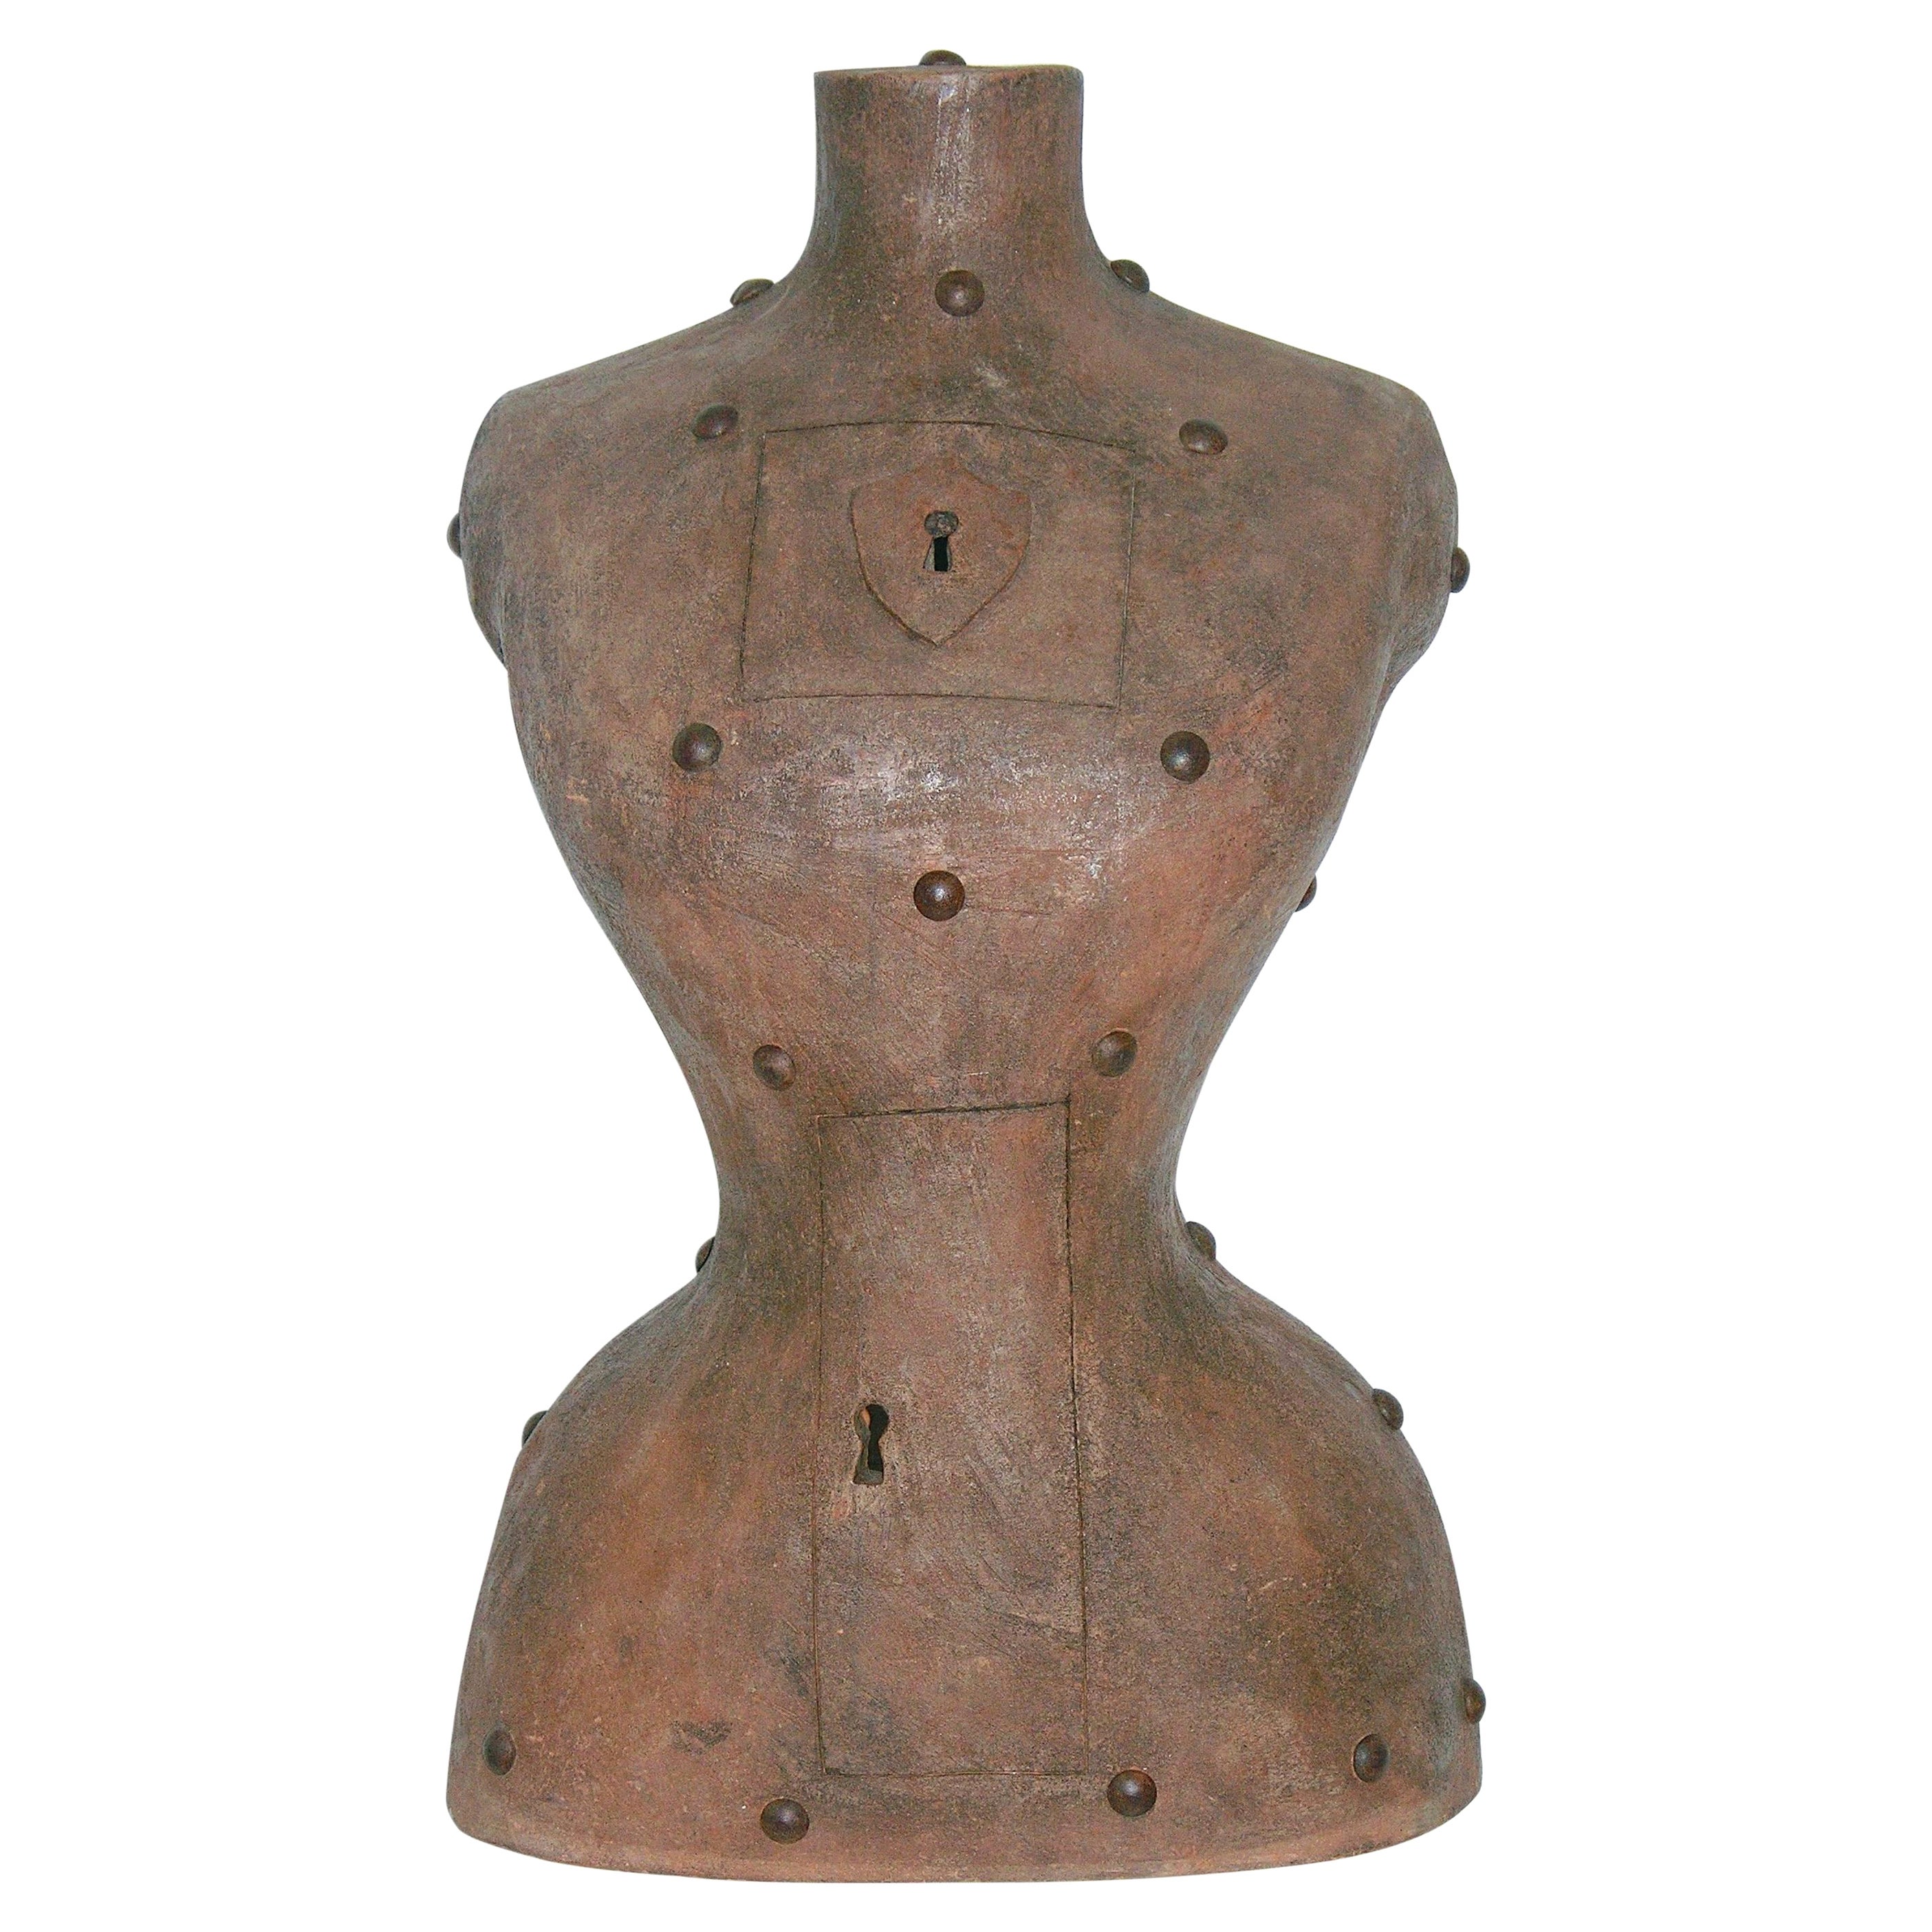 Contemporary Italian Modern Sculpture of a Bust in Brown Terracotta with Keyhole